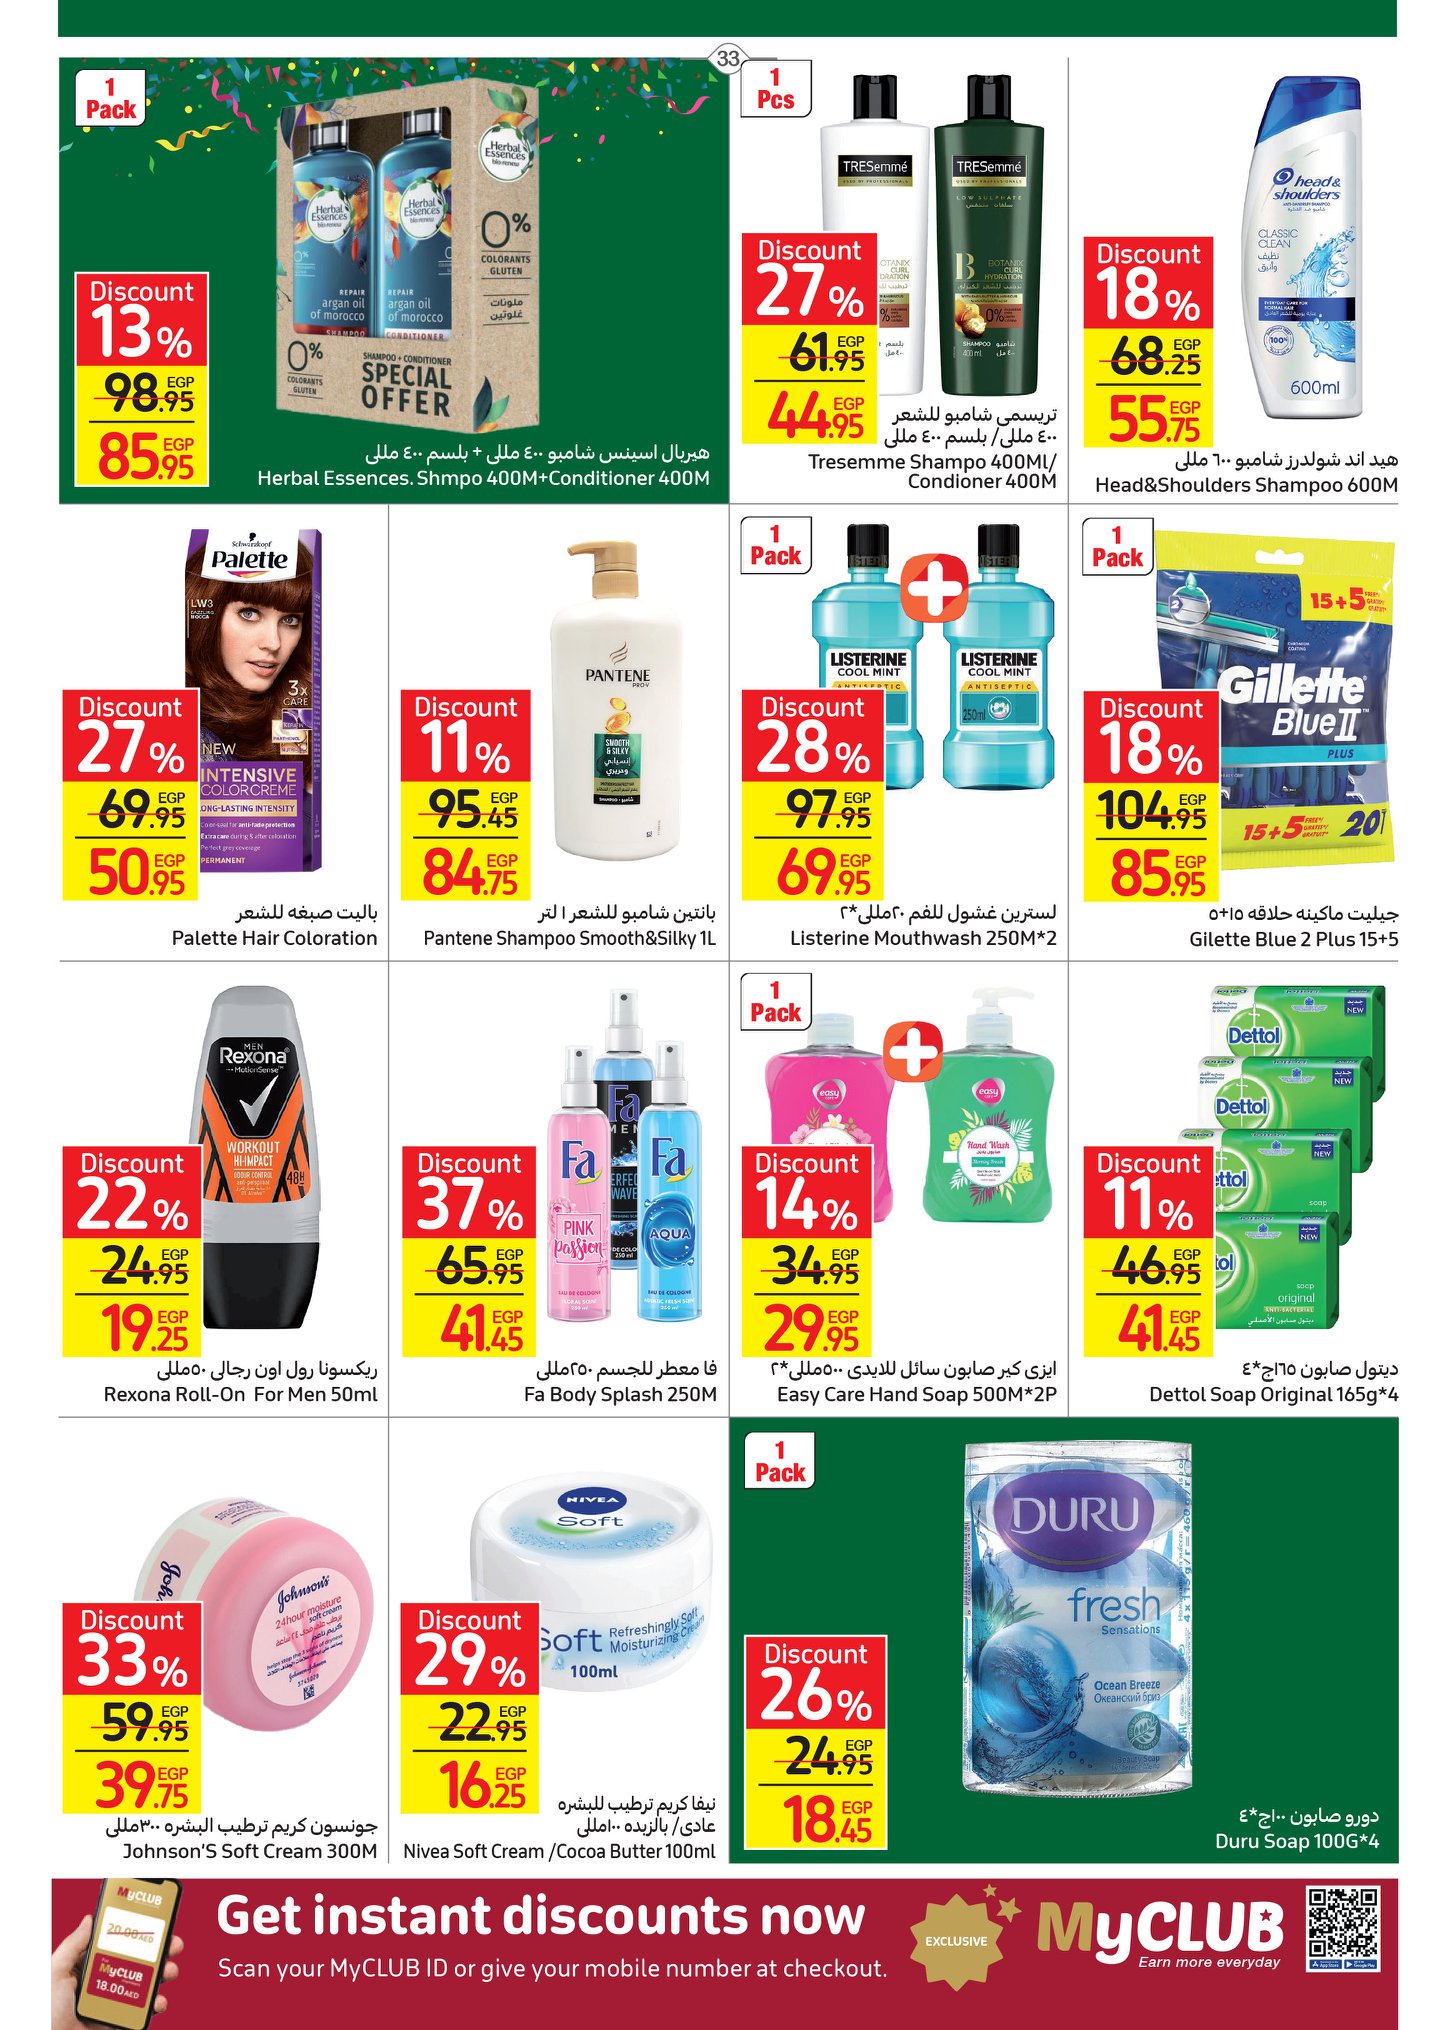 Carrefour magazine offers complete with 50% discounts and a surprise purchase in convenient installments without interest 38